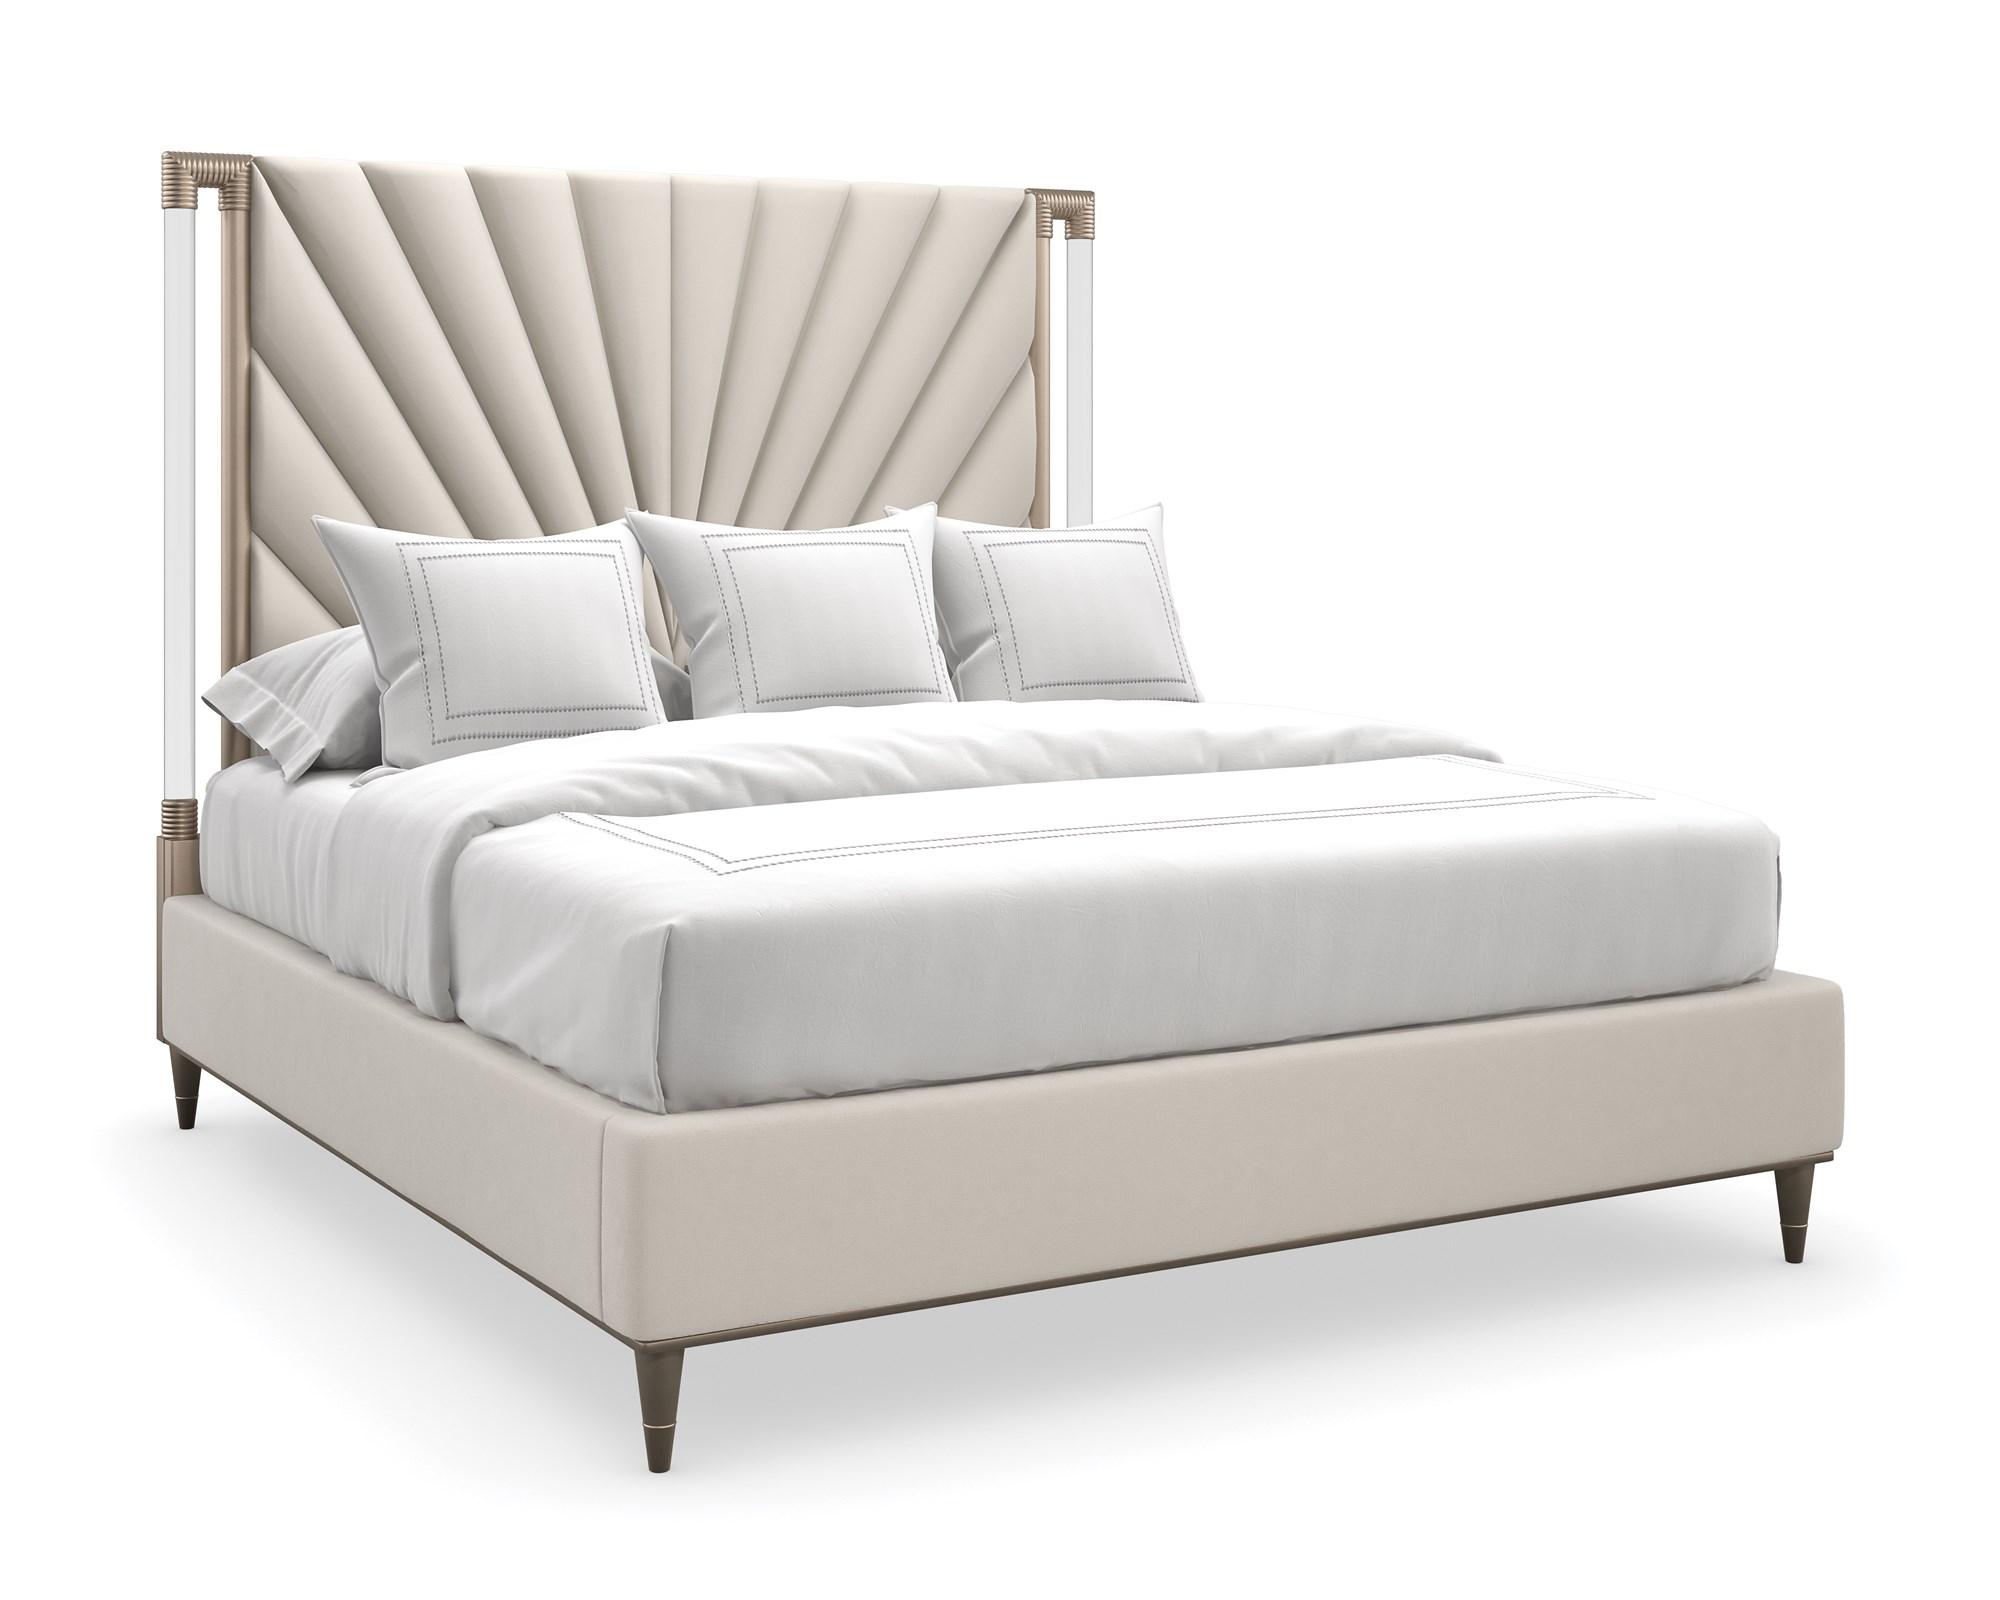 Contemporary Platform Bed VALENTINA UPH KING BED C113-422-121 in Pearl, Gold Fabric